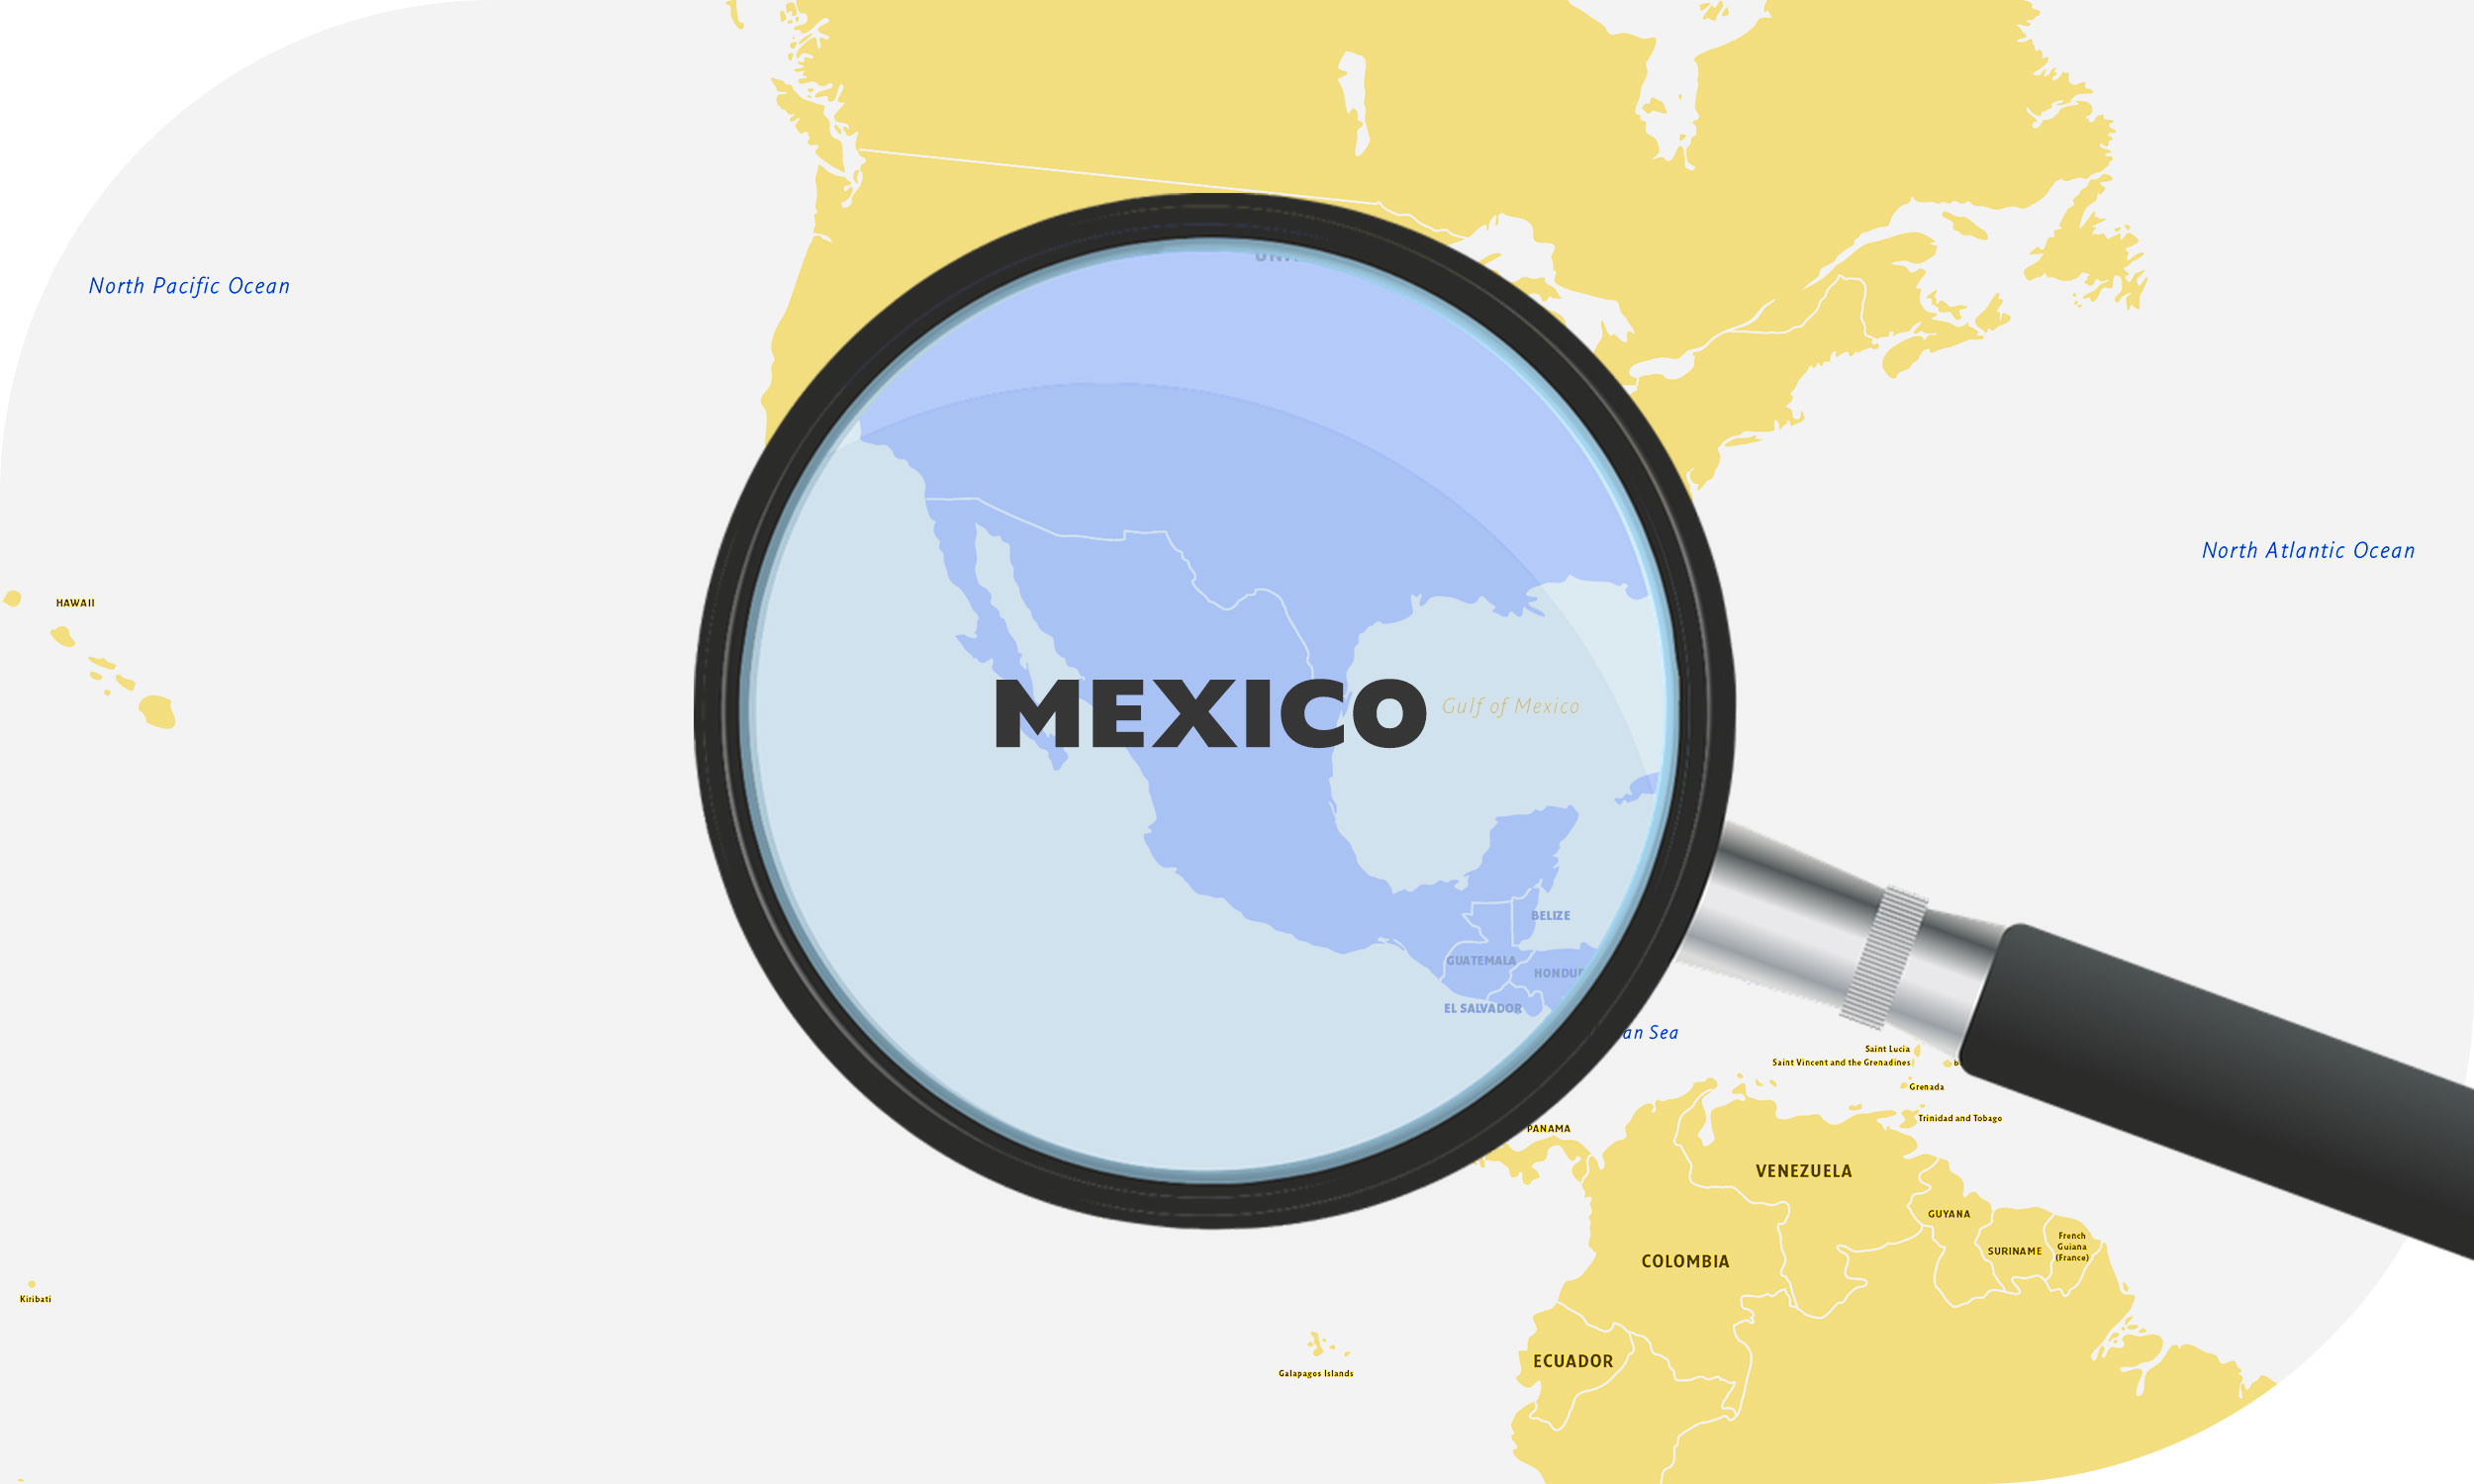 Mexico enlarged on map of North America